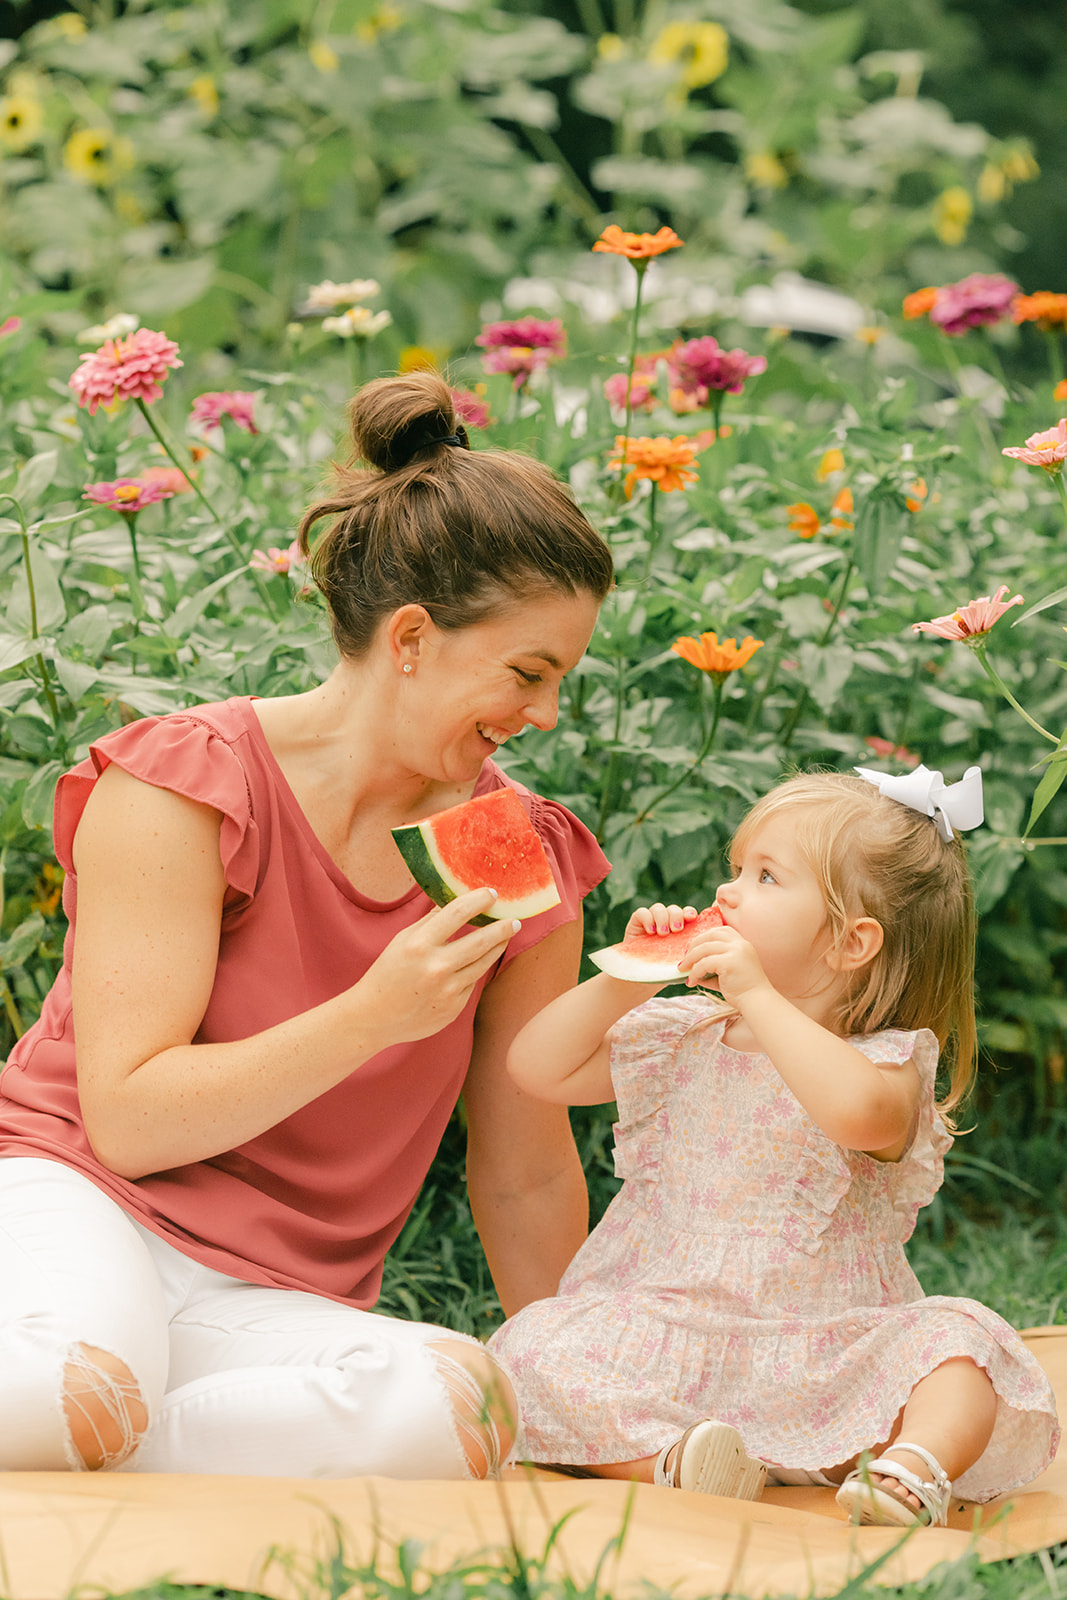 outdoor motherhood minis in garden. photographed in nashville photographer. mom and daughter eating watermelon